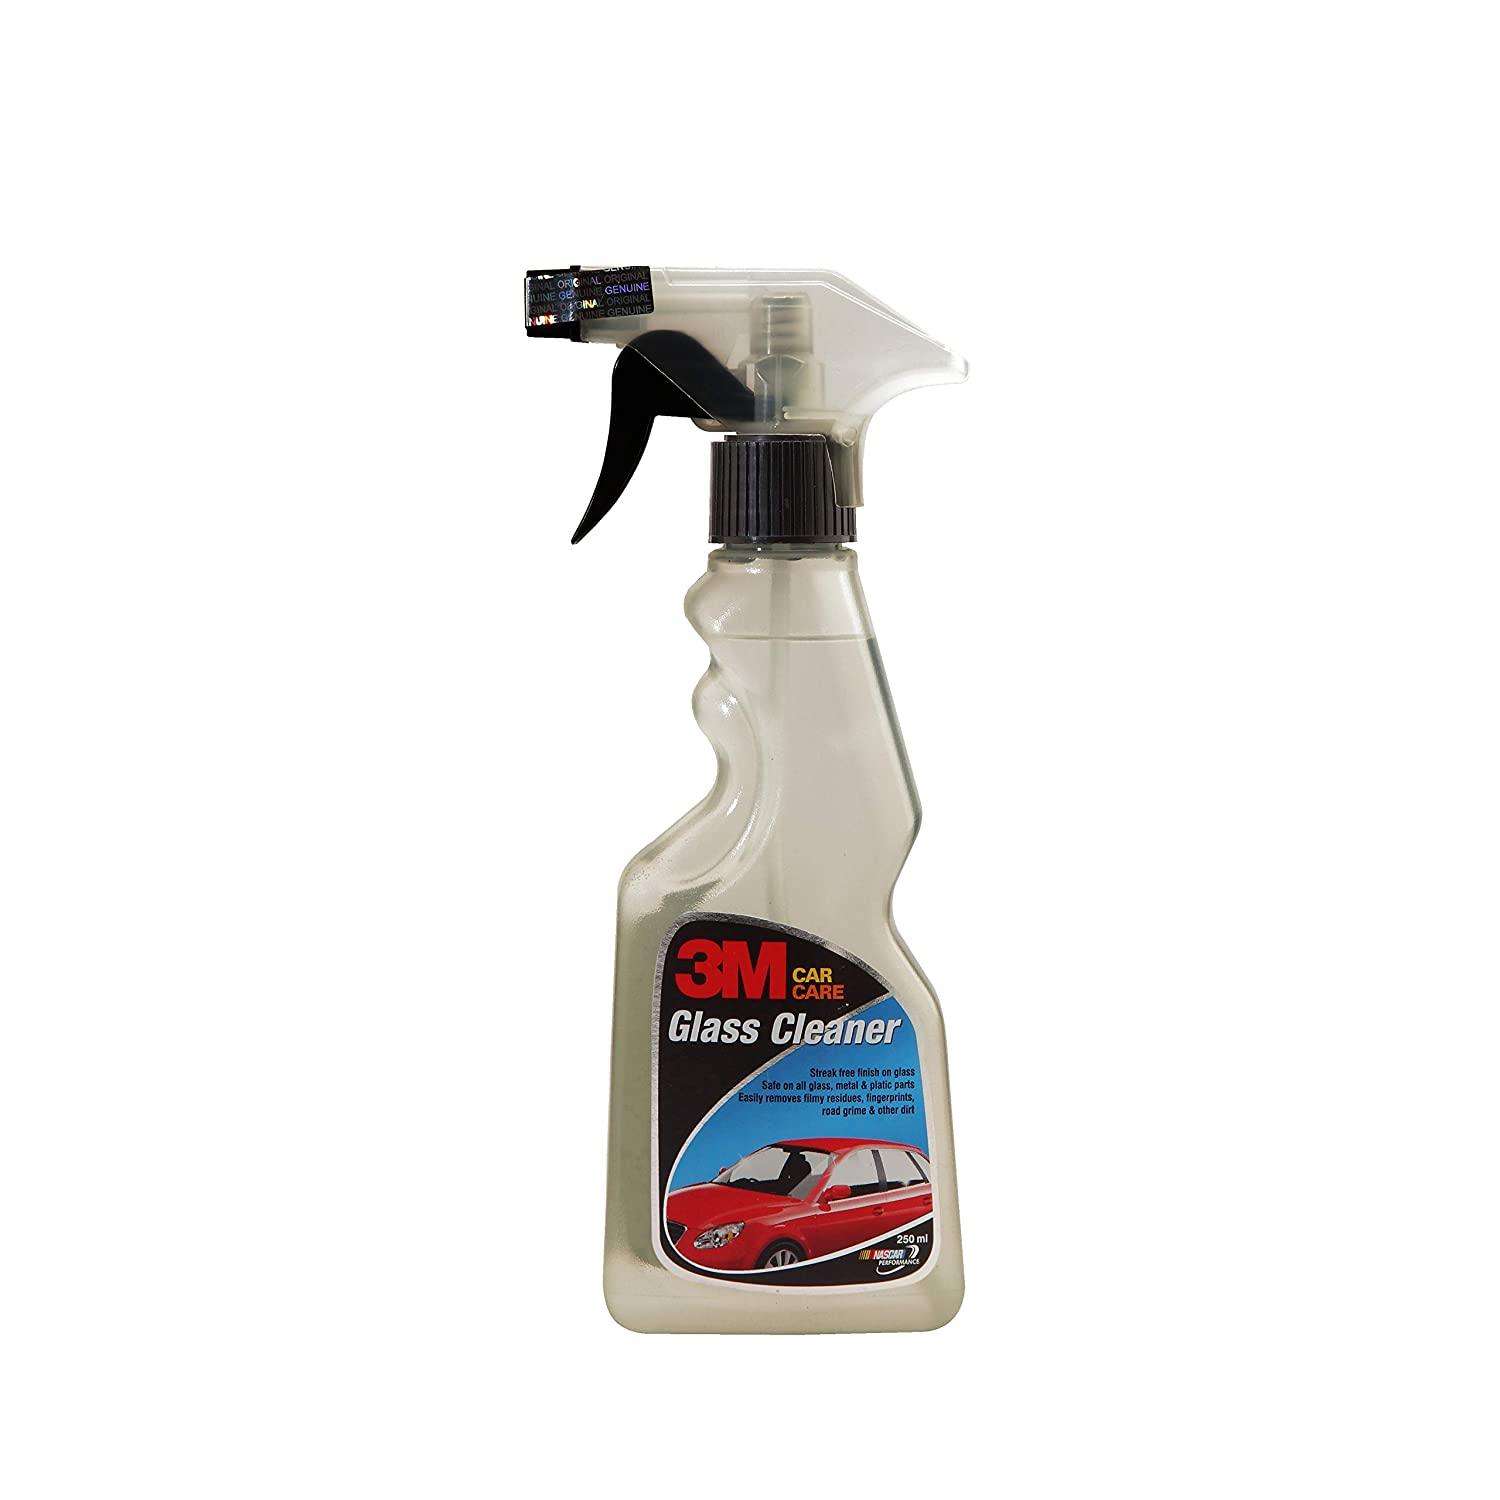 3M car glass cleaner